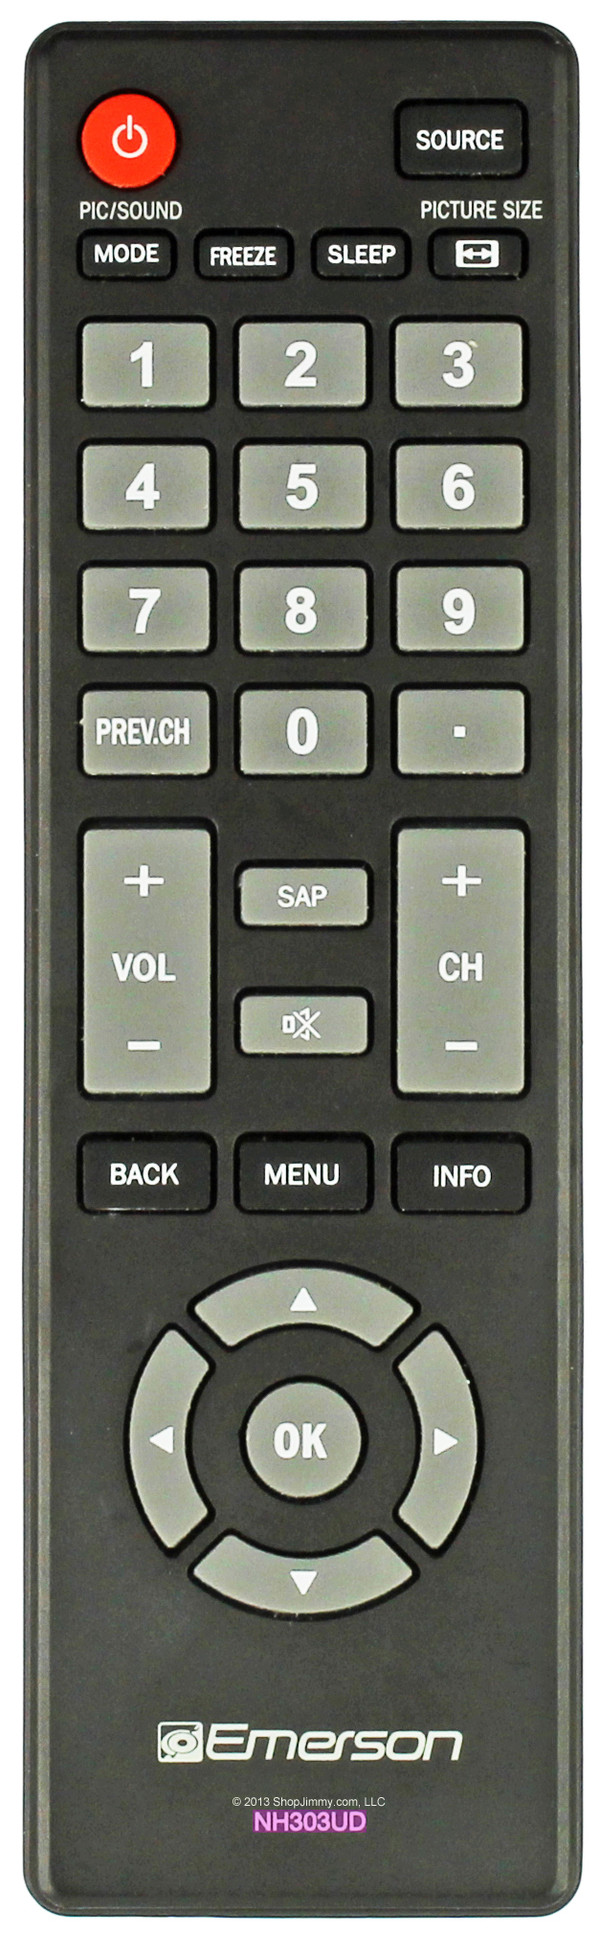 Emerson NH303UD Remote Control--Open Bag